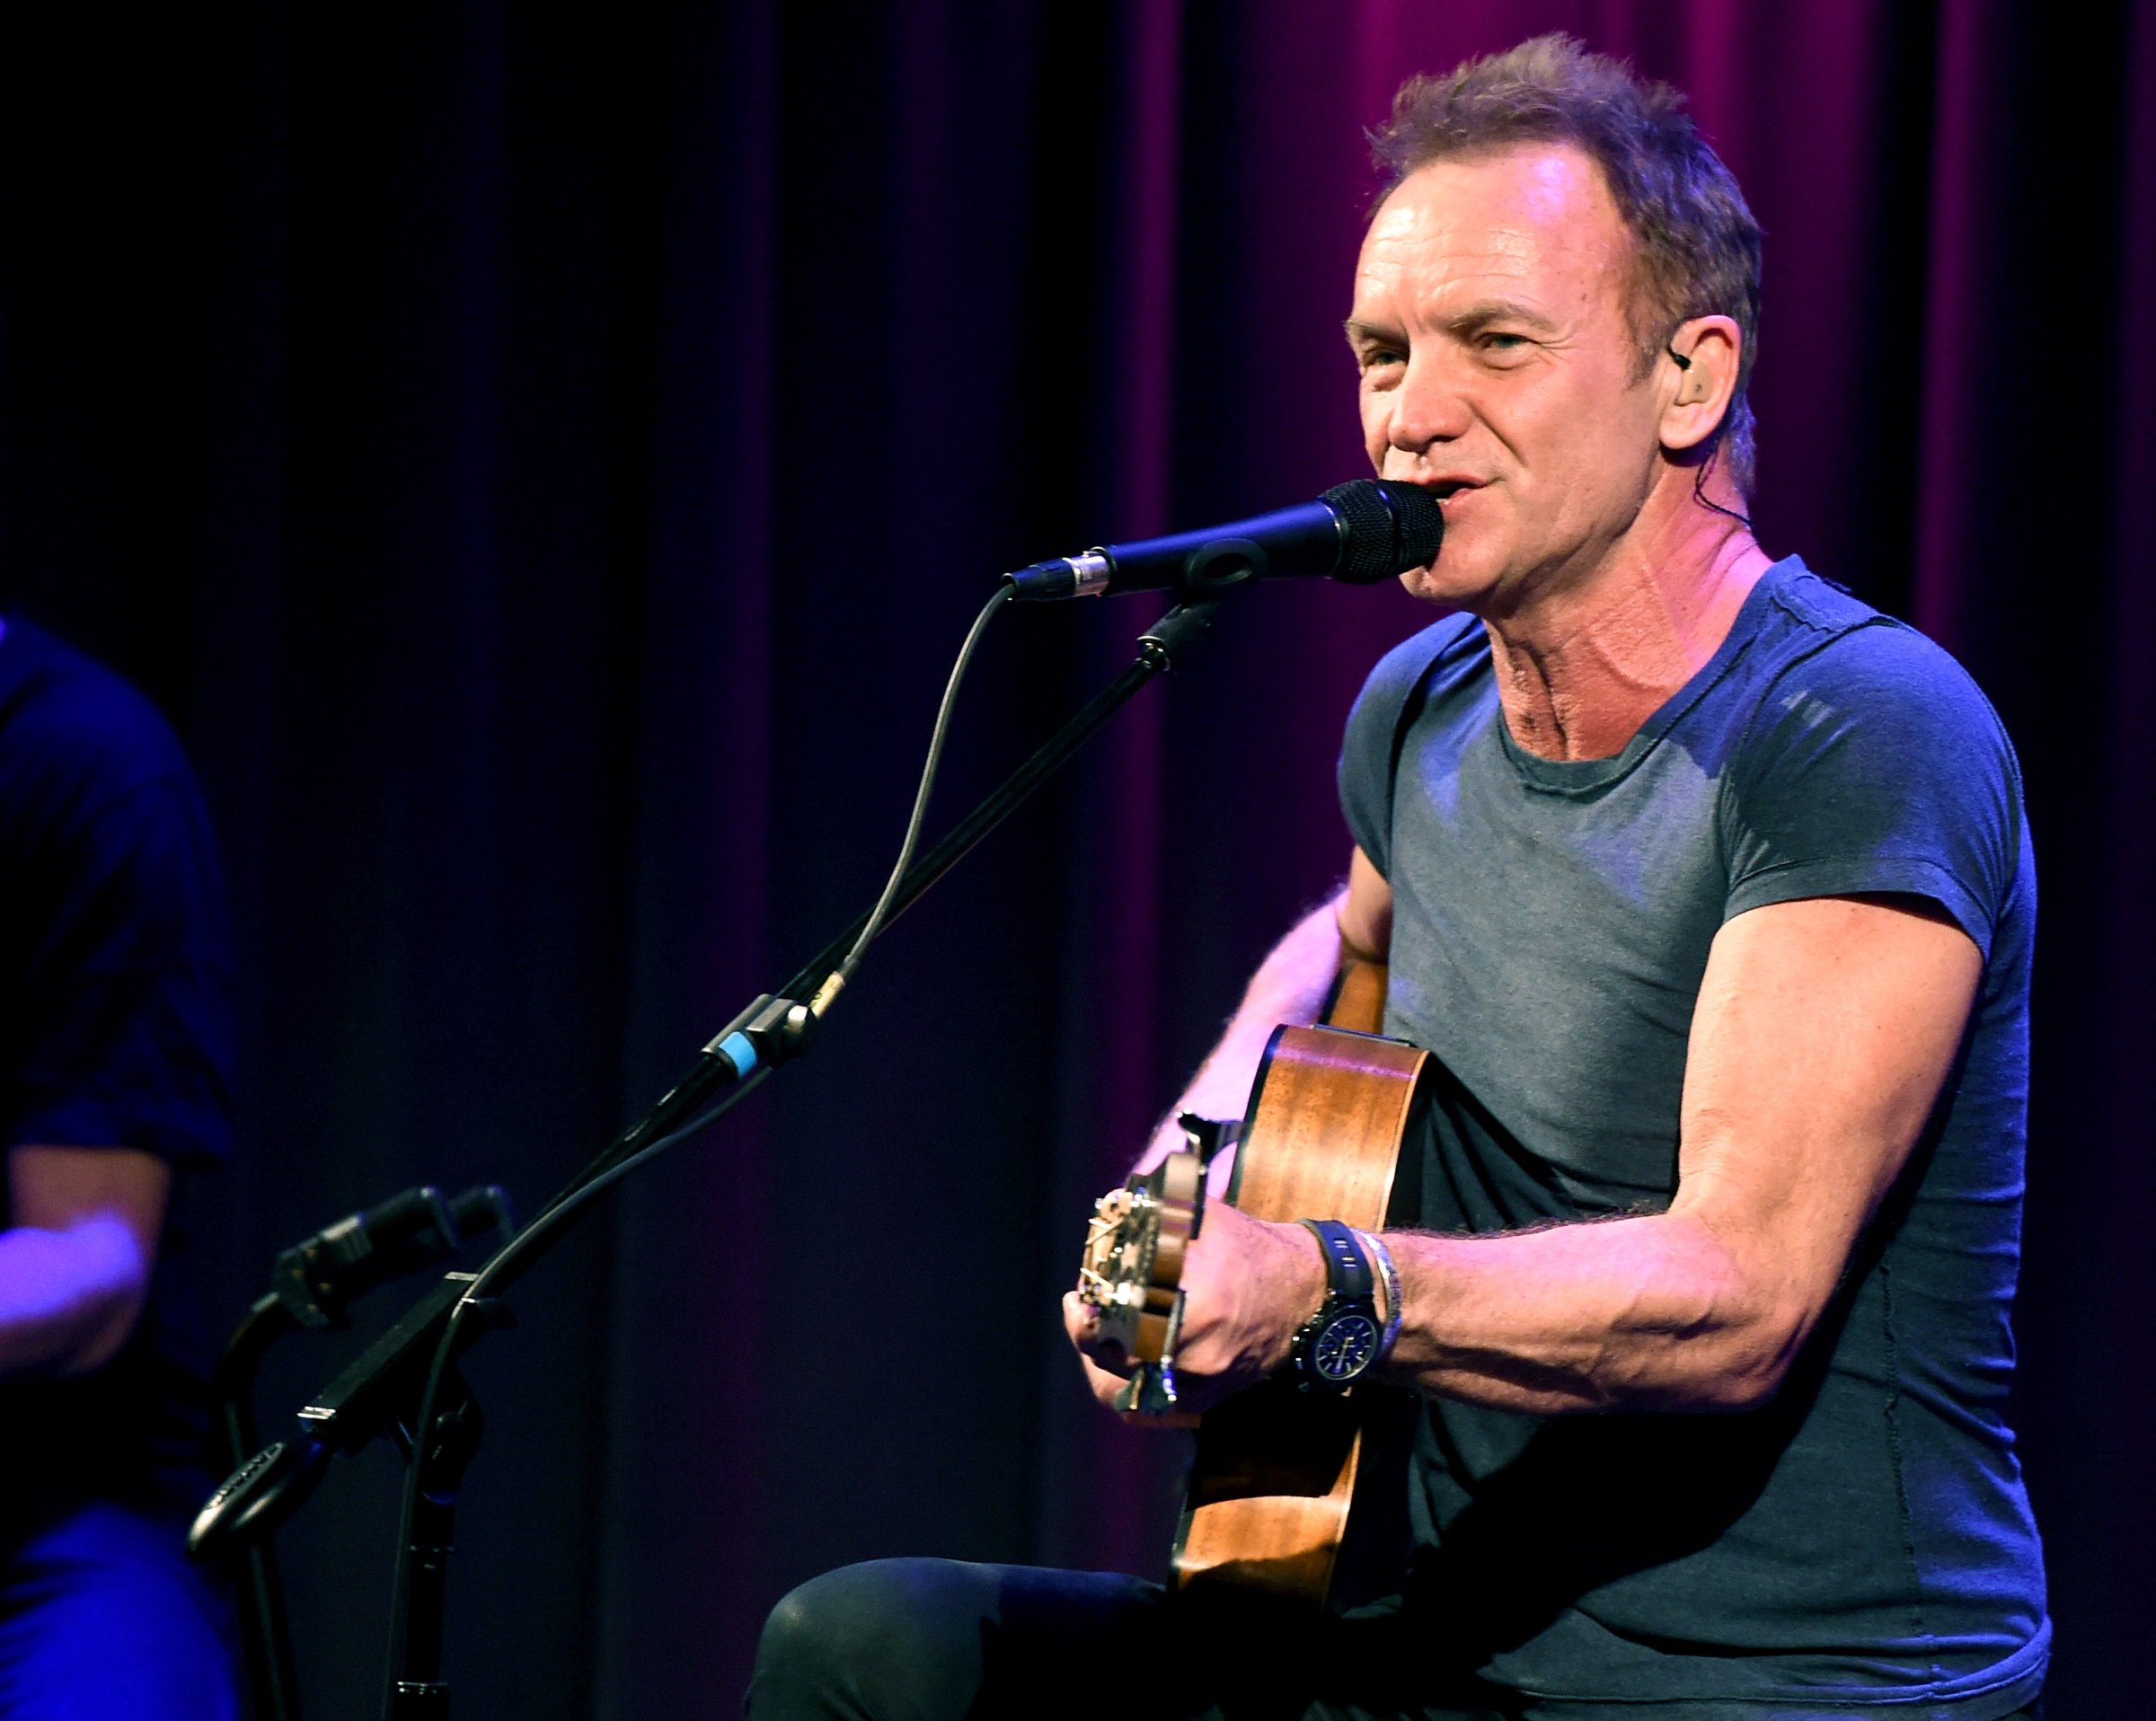 Singer/songwriter Sting performs onstage at the GRAMMY Museum on October 26, 2016 in Los Angeles, California.